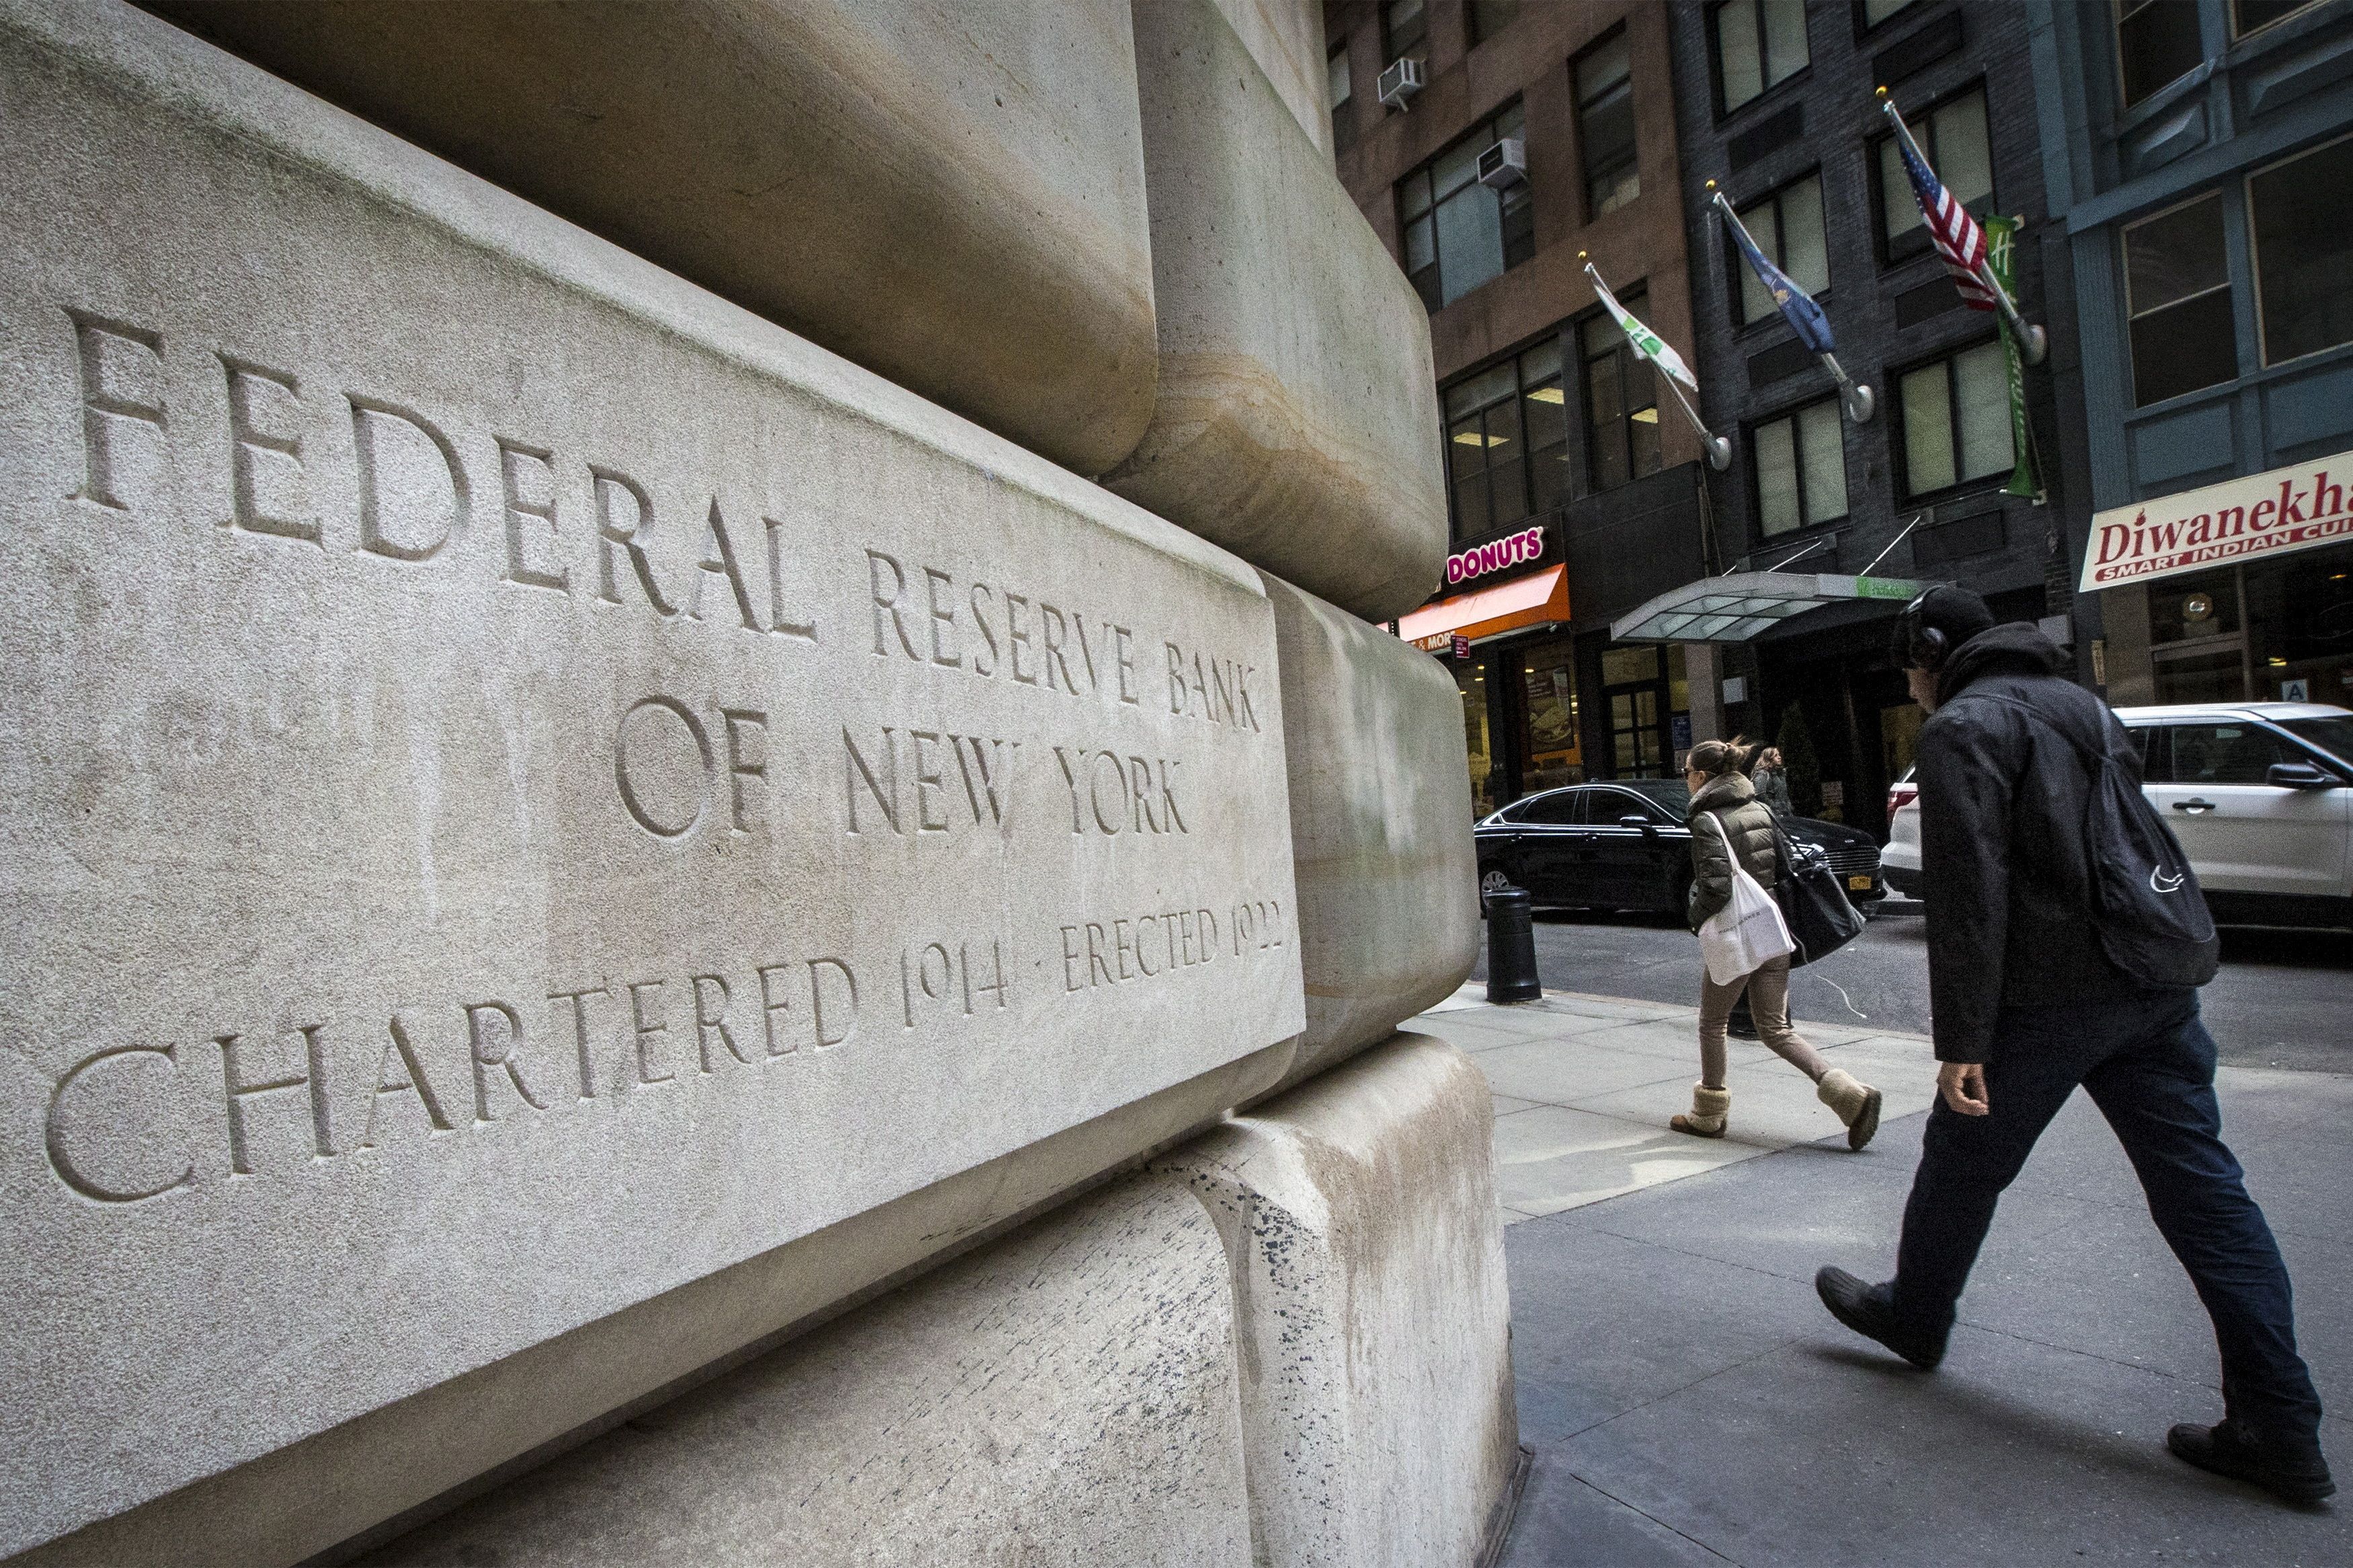 About the New York Fed - FEDERAL RESERVE BANK of NEW YORK